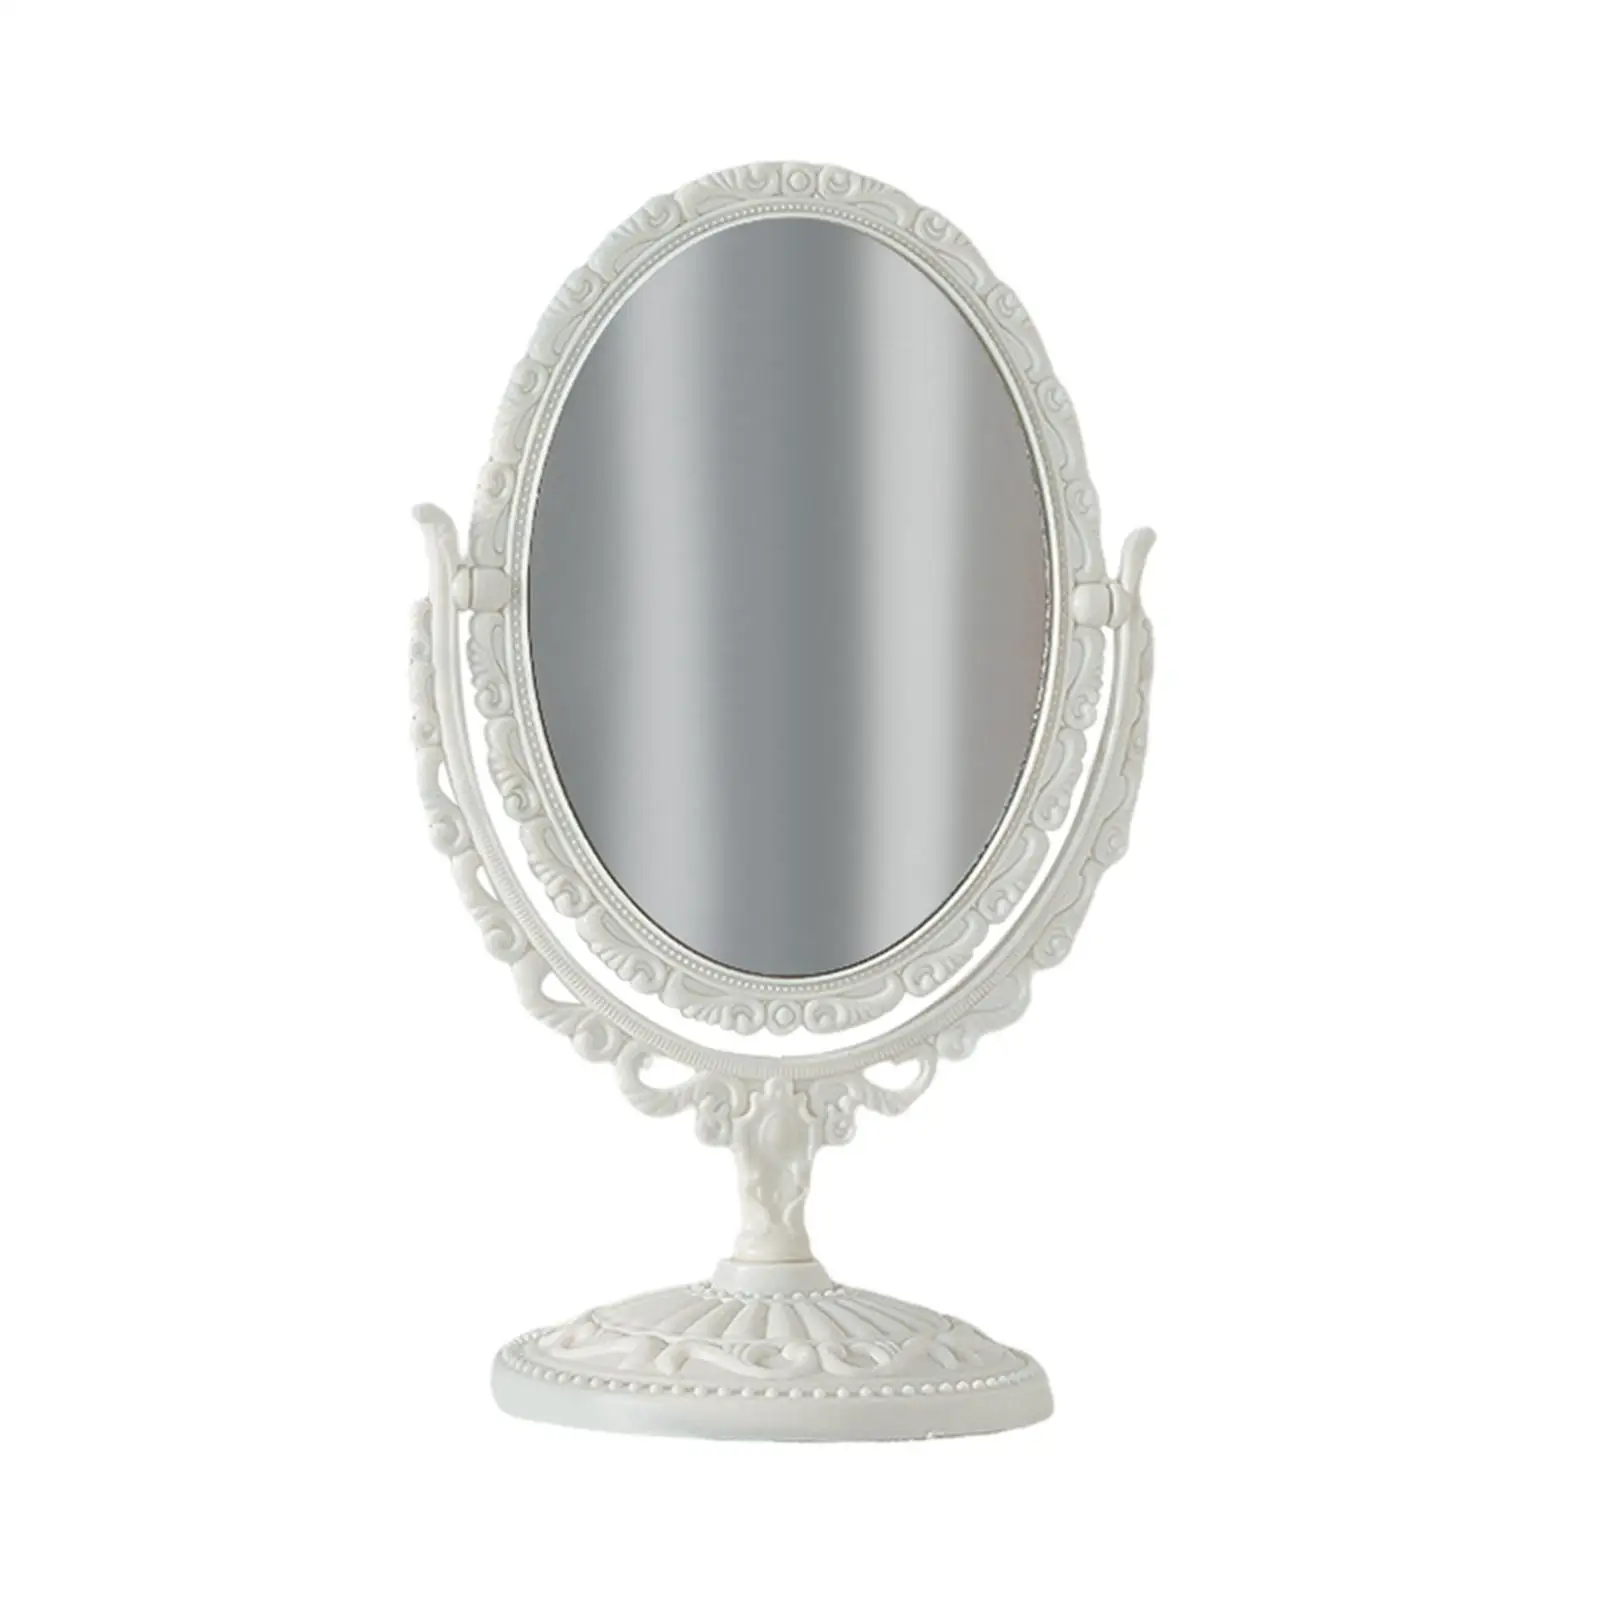 Retro Makeup Mirror Double Side Swivel with Frame Stand Oval Tabletop Mirror for Bathroom Dressing Table Women Birthday Gift